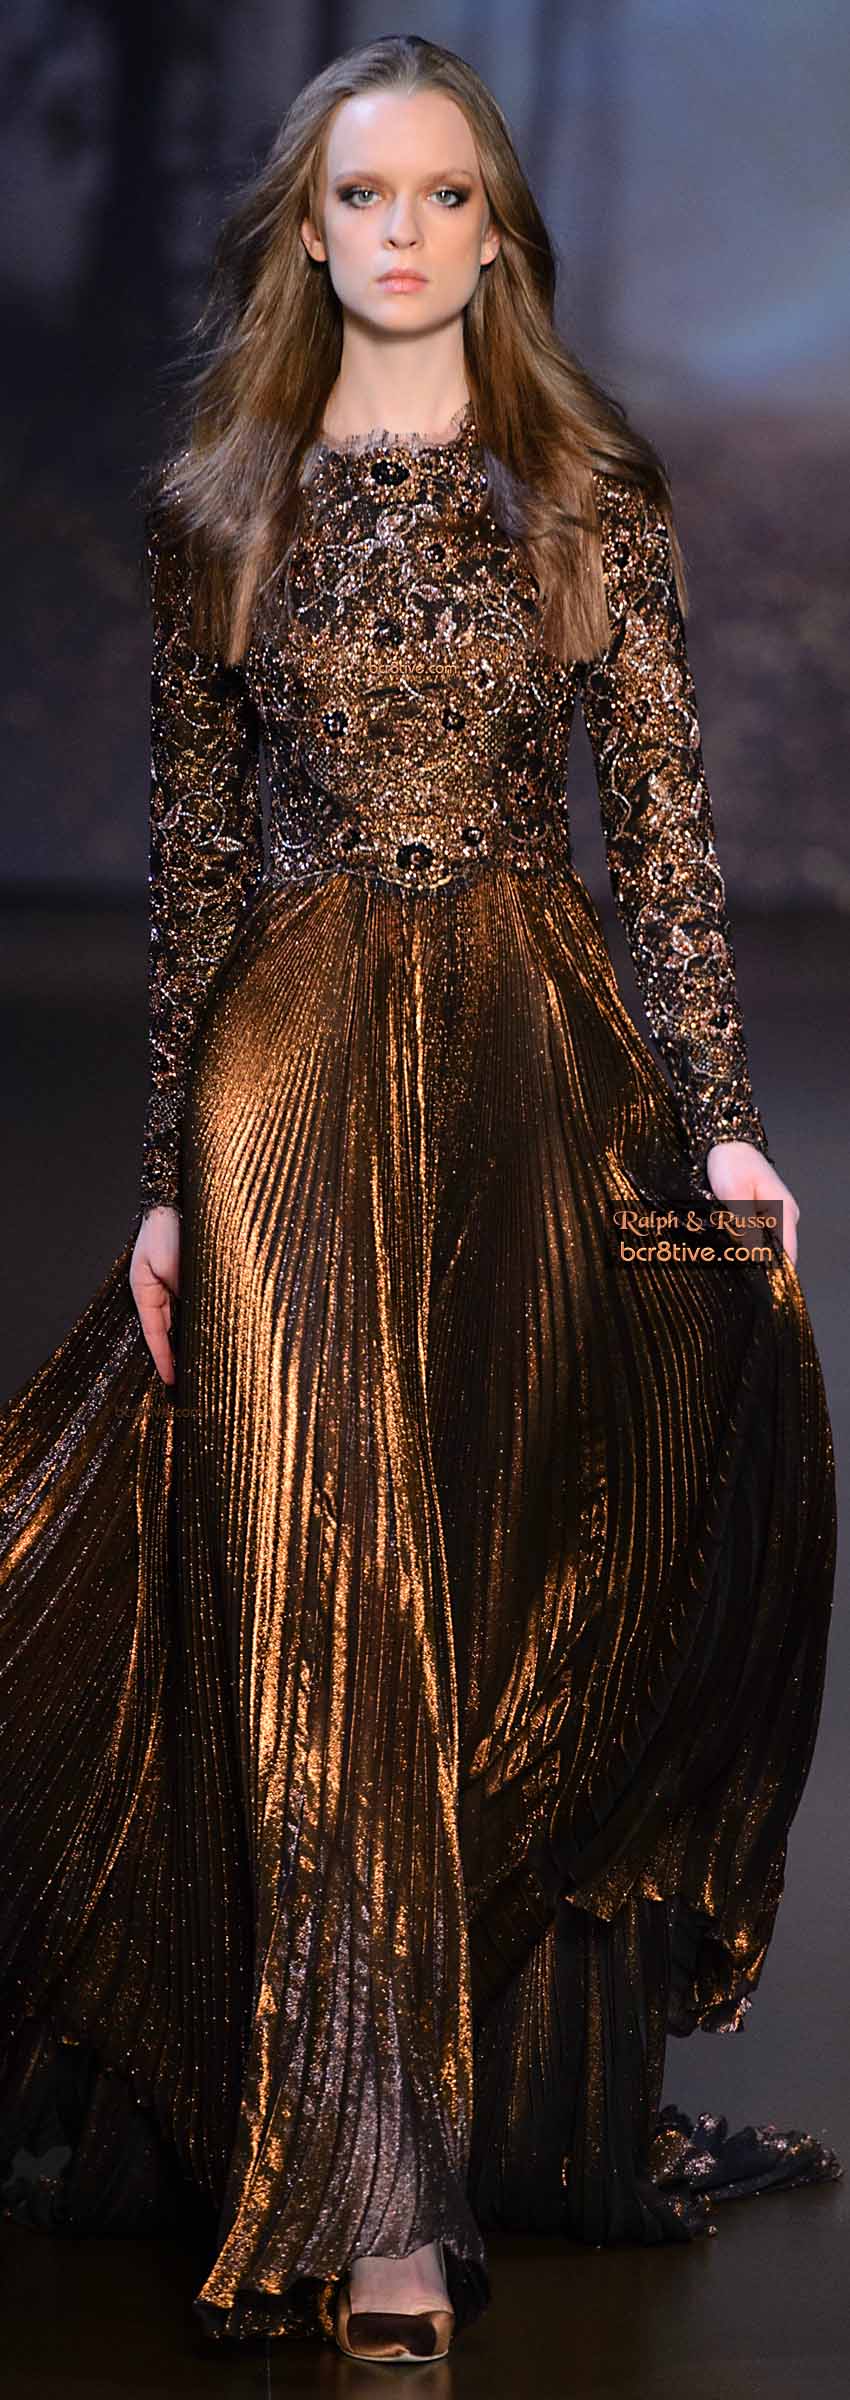 Ralph & Russo Couture Fall 2015-16